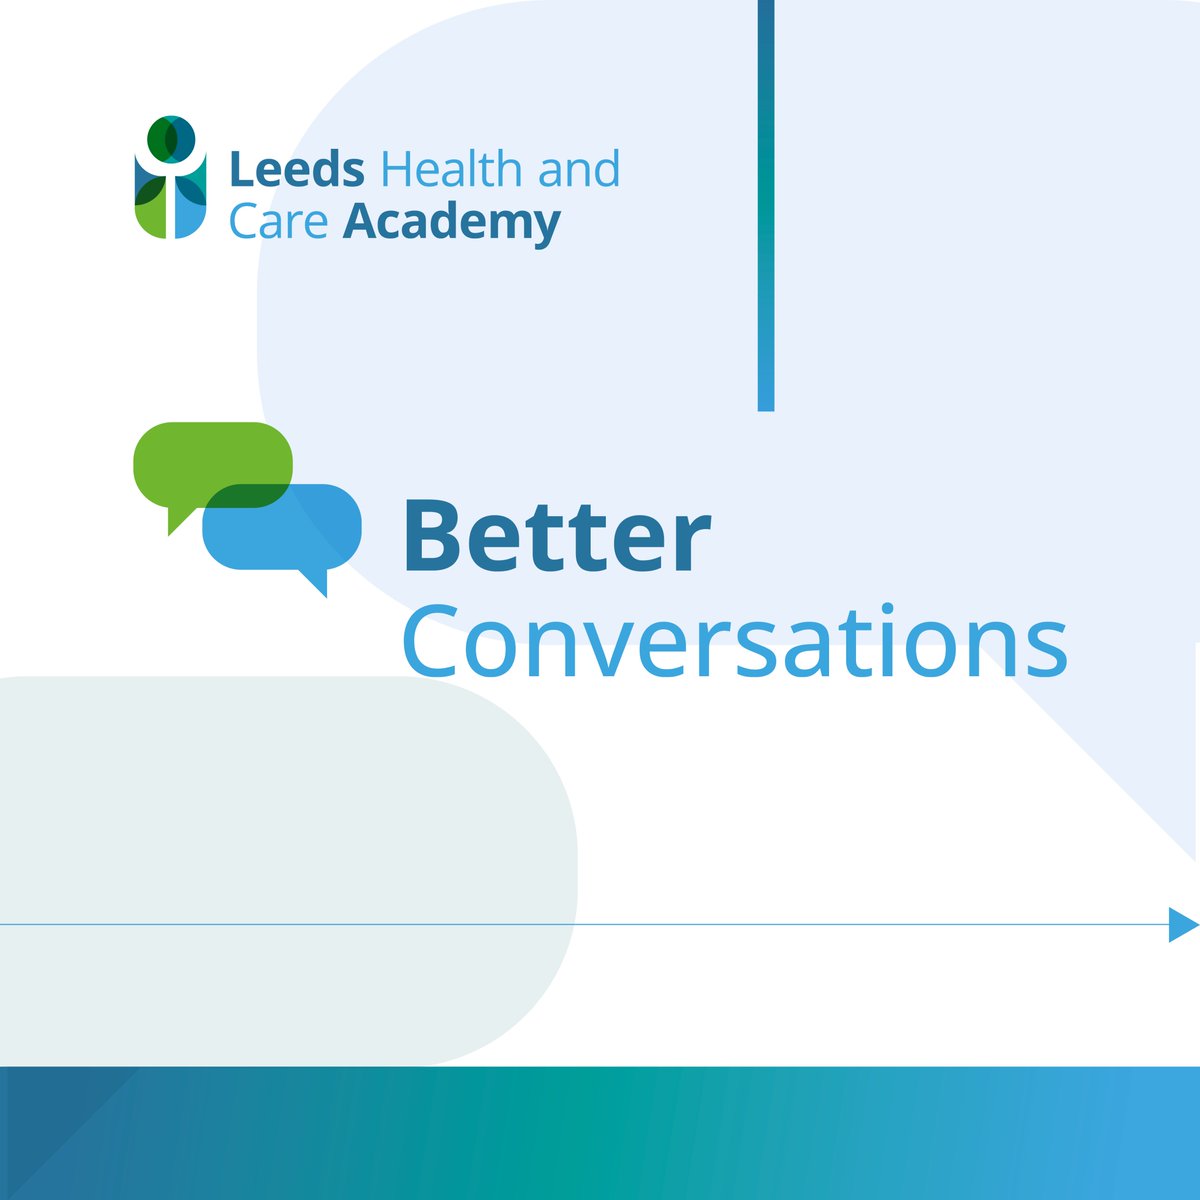 Build on your core communication skills and learn about the person-centred care and support principles when you sign-up to a Better Conversations workshop. The next workshop is taking place on Wednesday 22nd November. Find out more and book here: leedshealthandcareacademy.org/learning/syste…